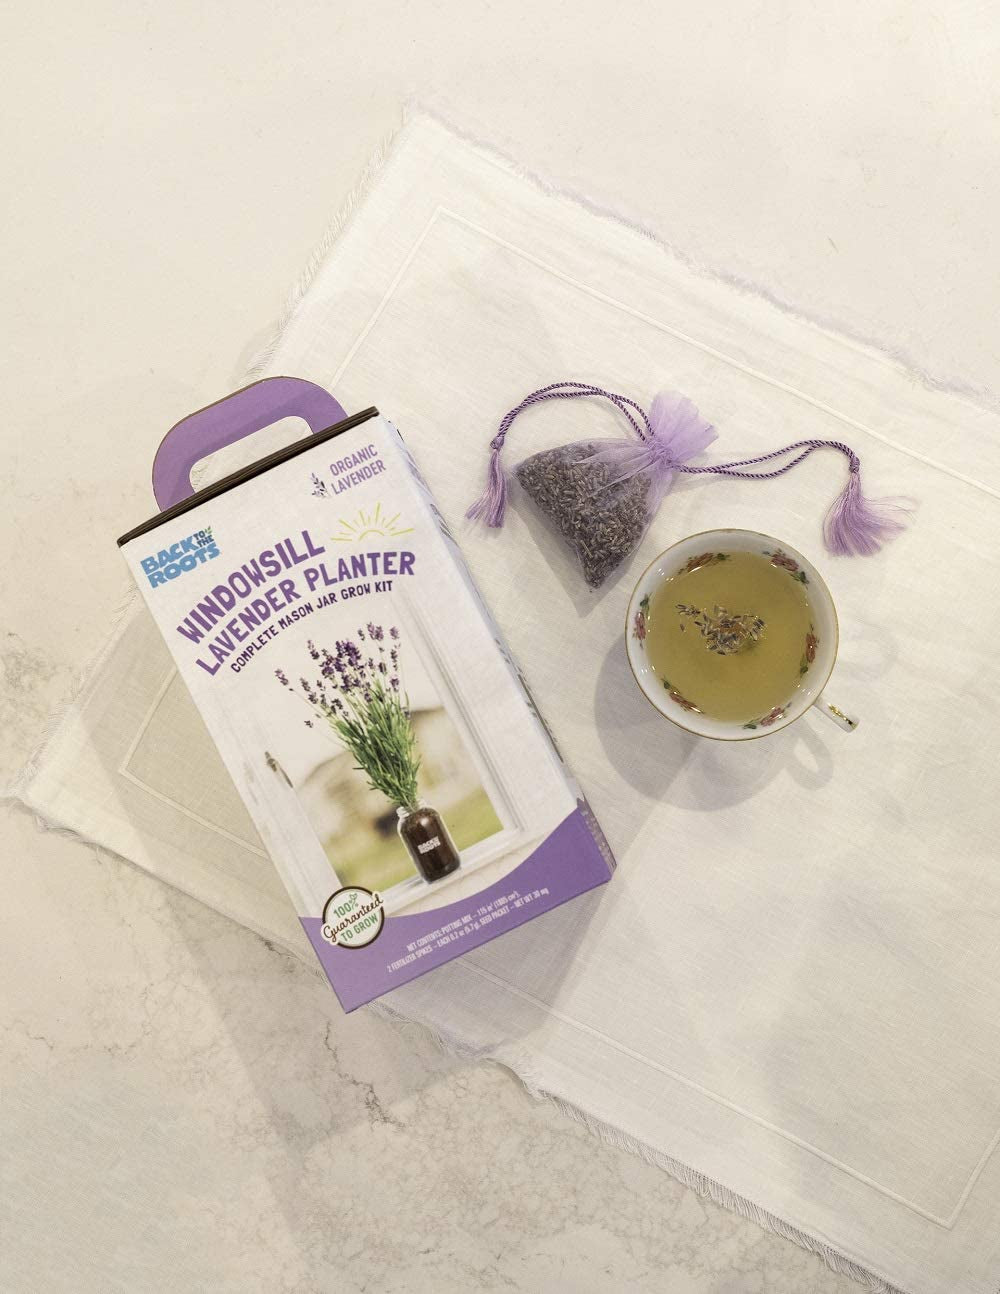 Lavender Organic Windowsill Planter Kit - Grows Year Round, Includes Everything Needed for Planting